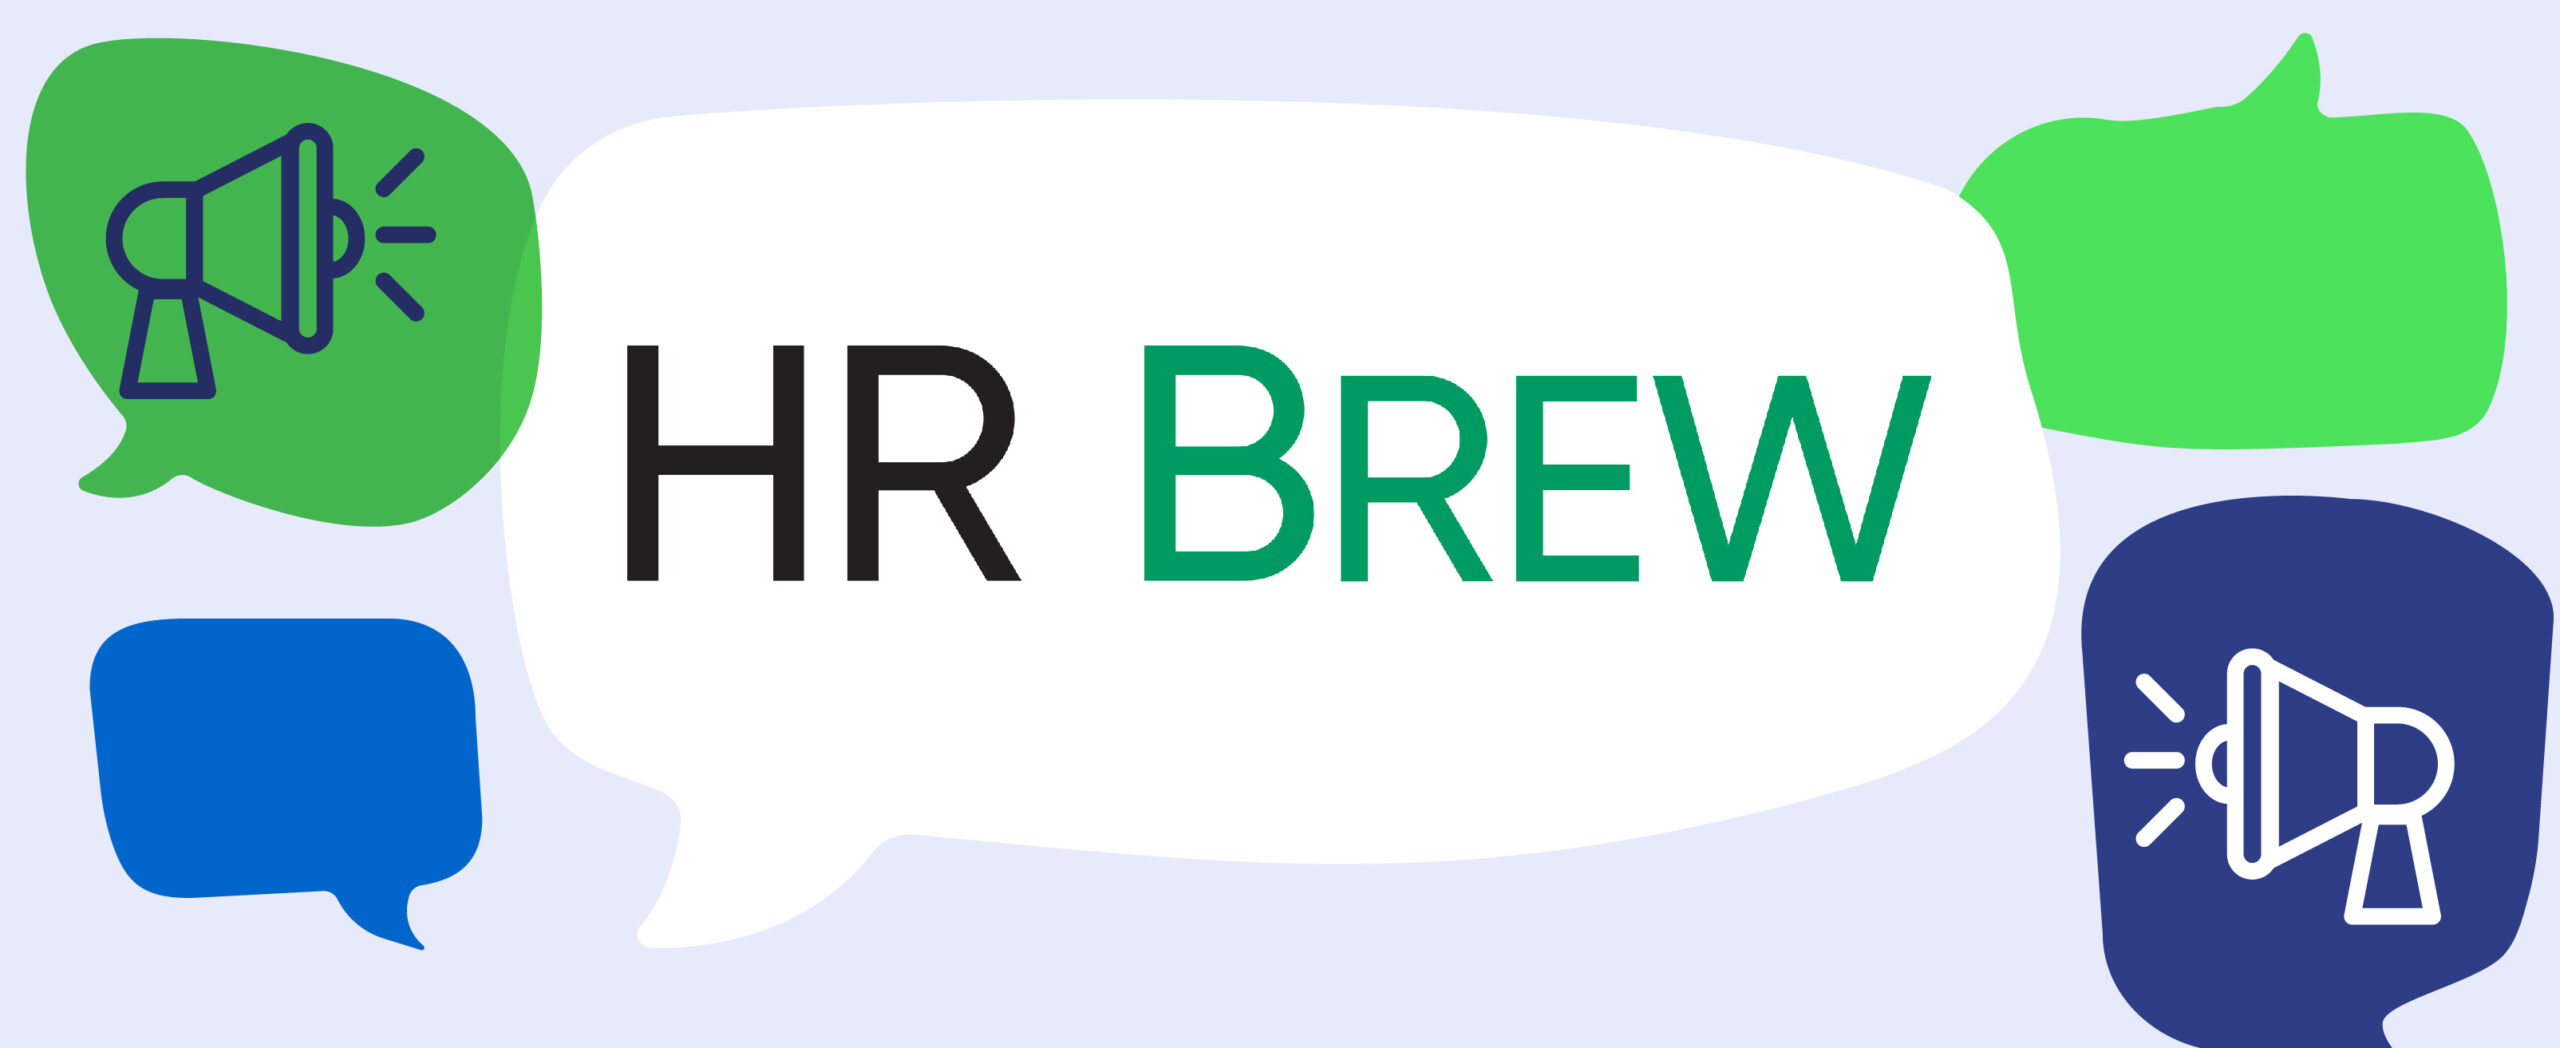 HR Brew logo in speech bubble with various green and blue speech bubbles and media icons.